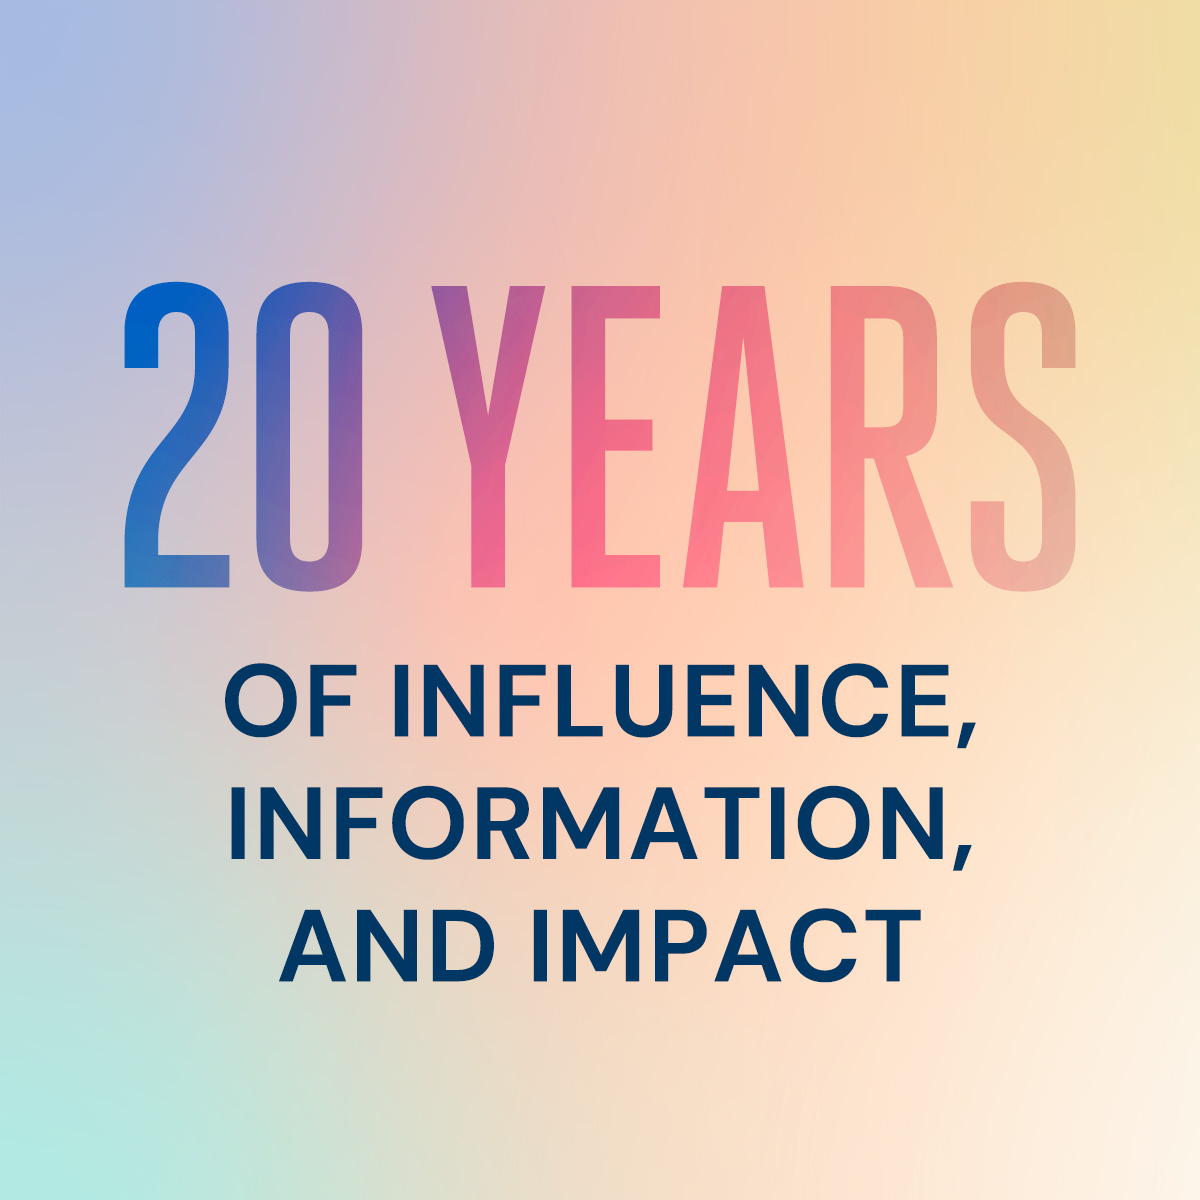 20 Years of Influence, Information, and Impact